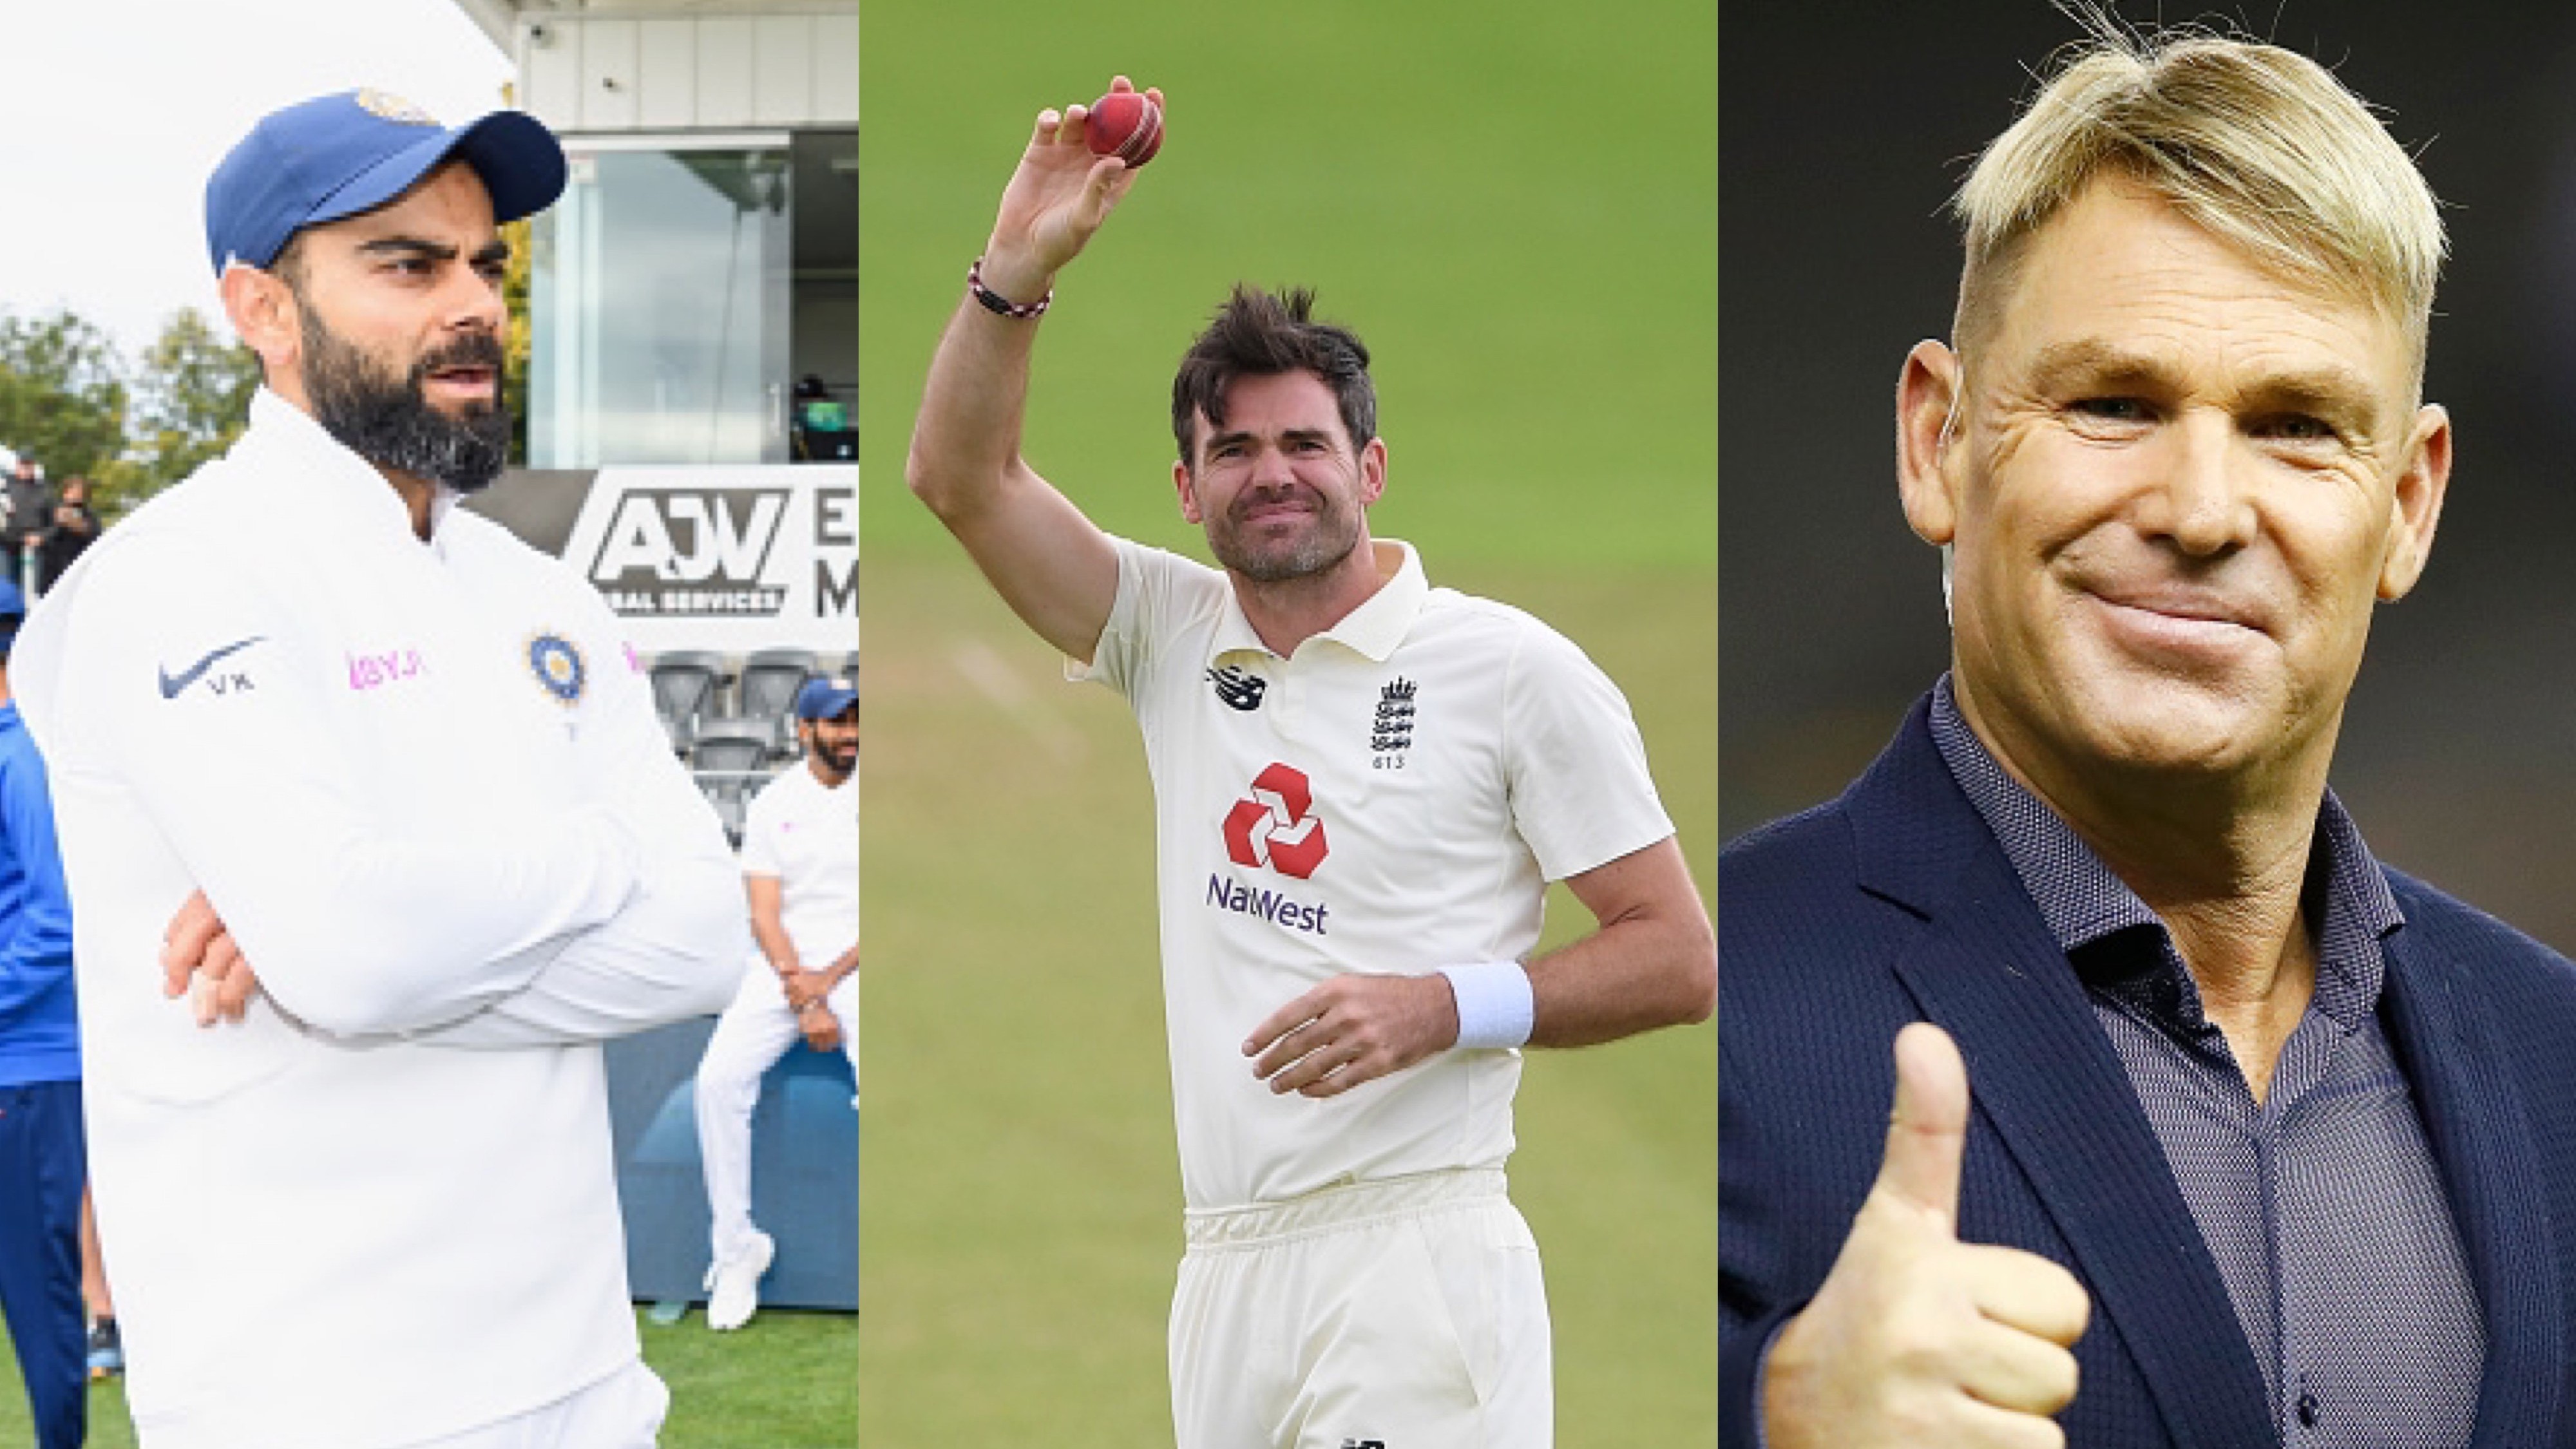 ENG v PAK 2020: Cricket fraternity reacts as James Anderson scripts history to become 1st pacer to pick 600 Test wickets